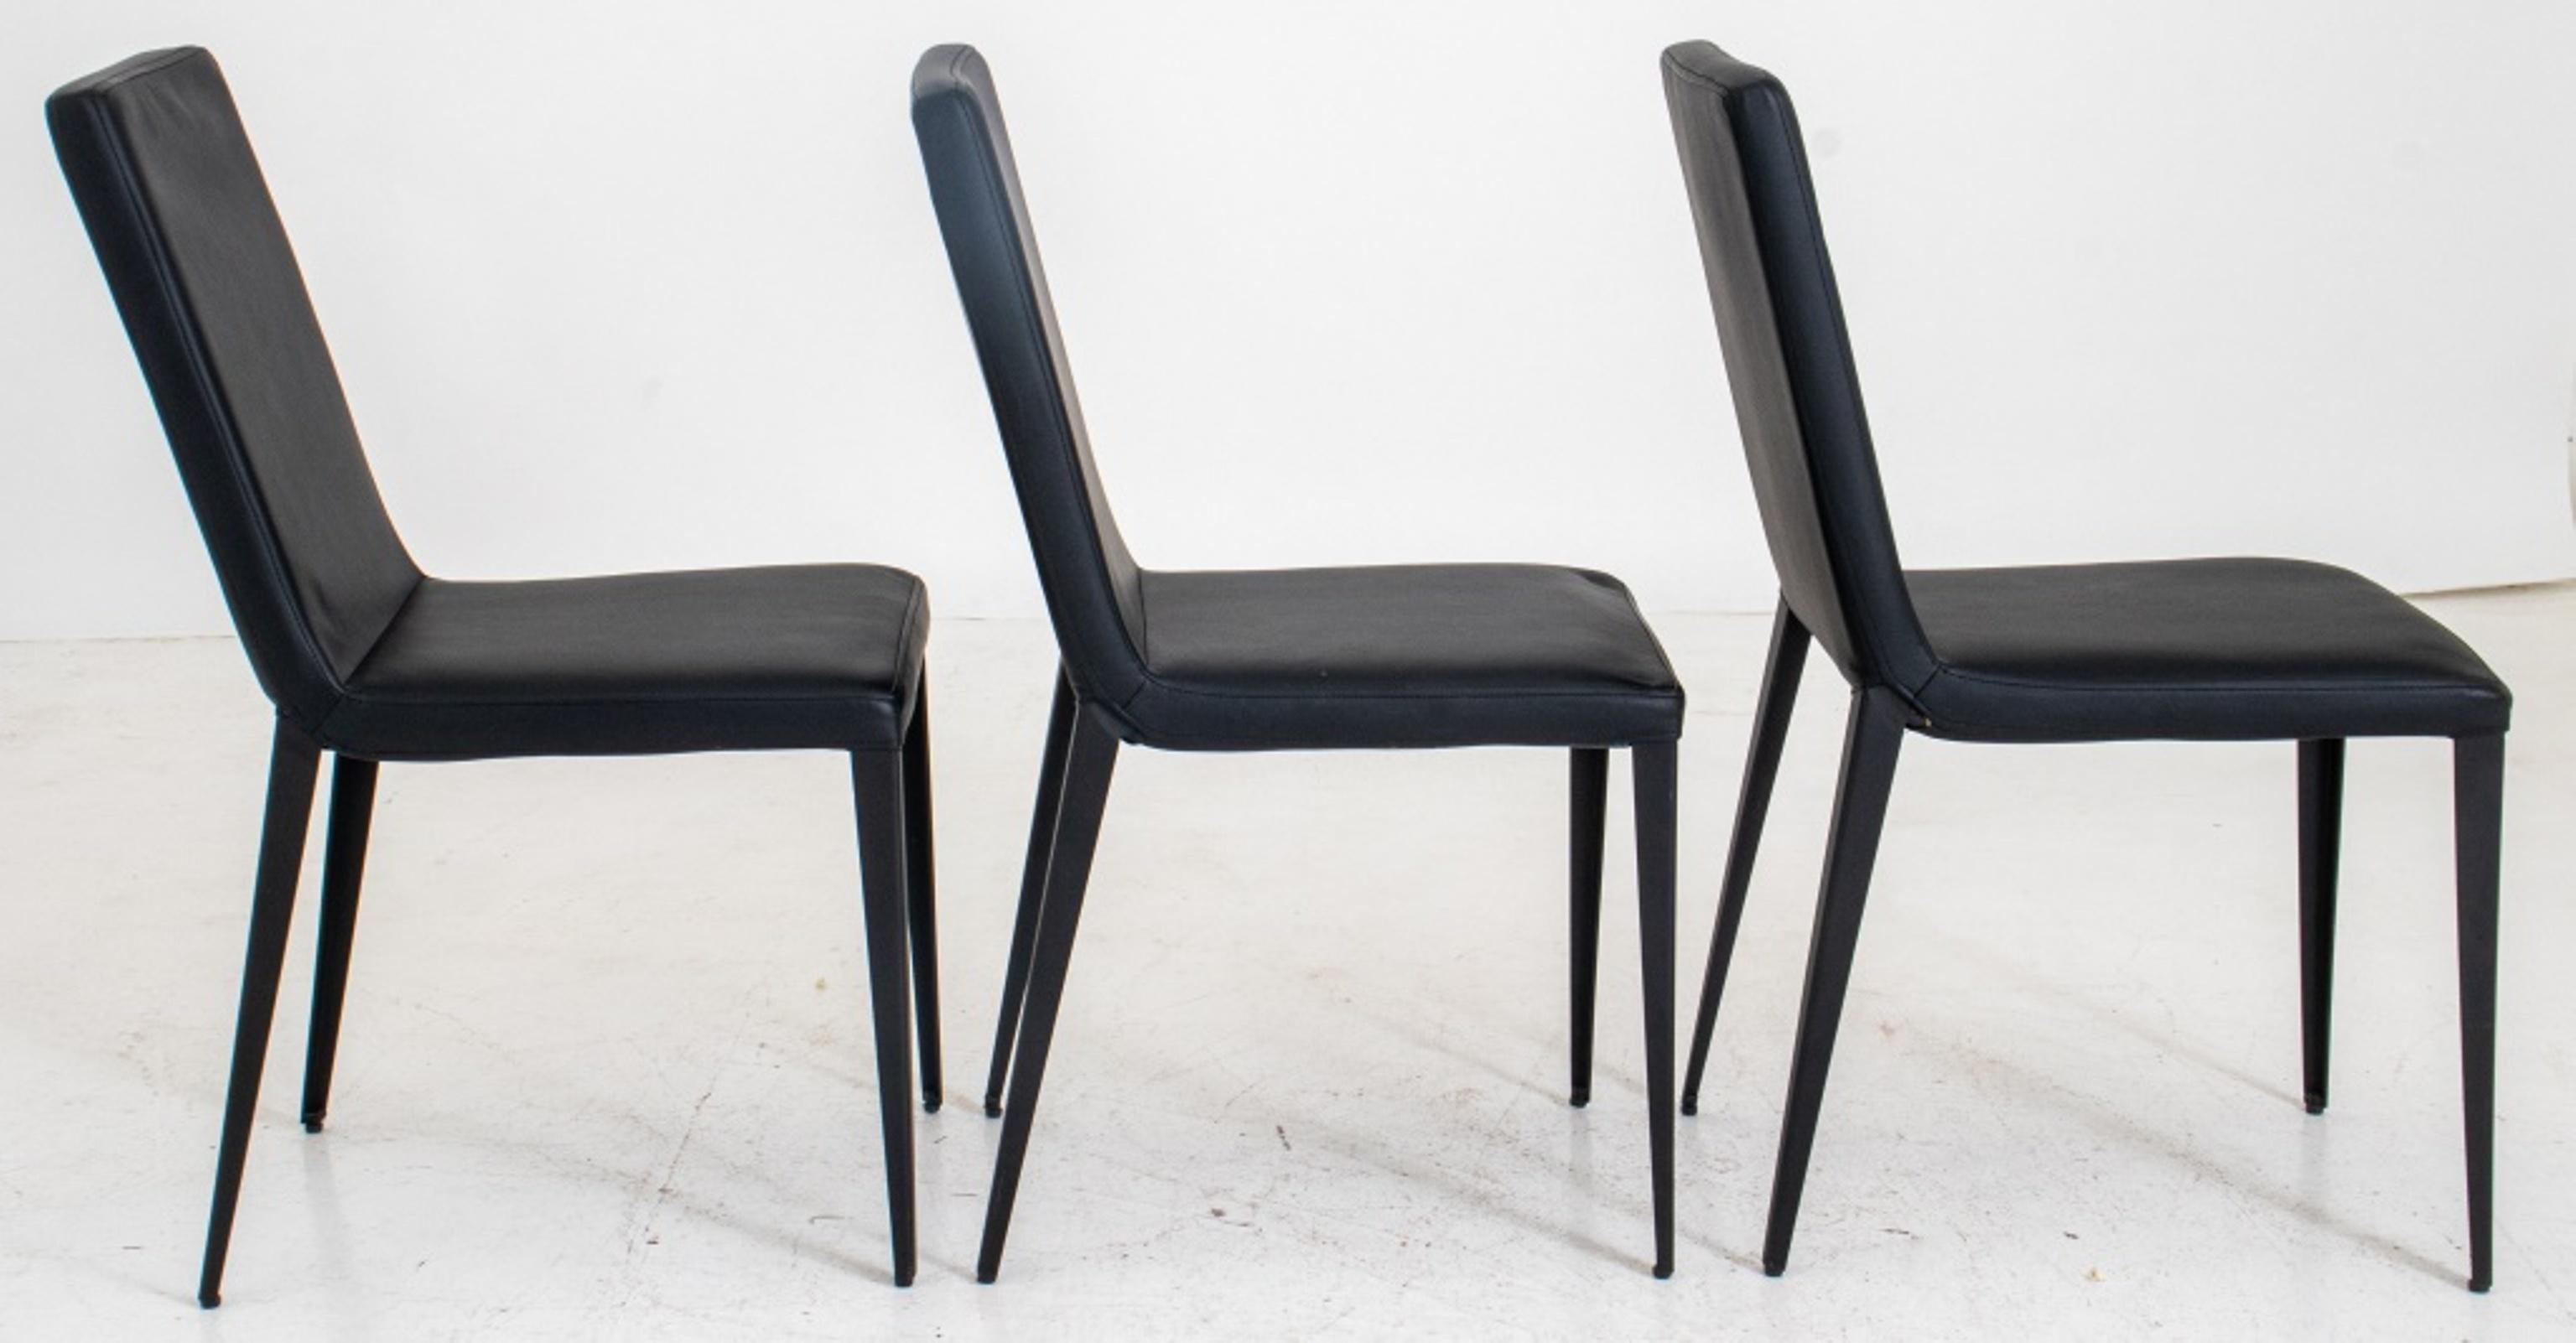 20th Century Italian Modern Style Black Dining/Side chairs, 3 For Sale